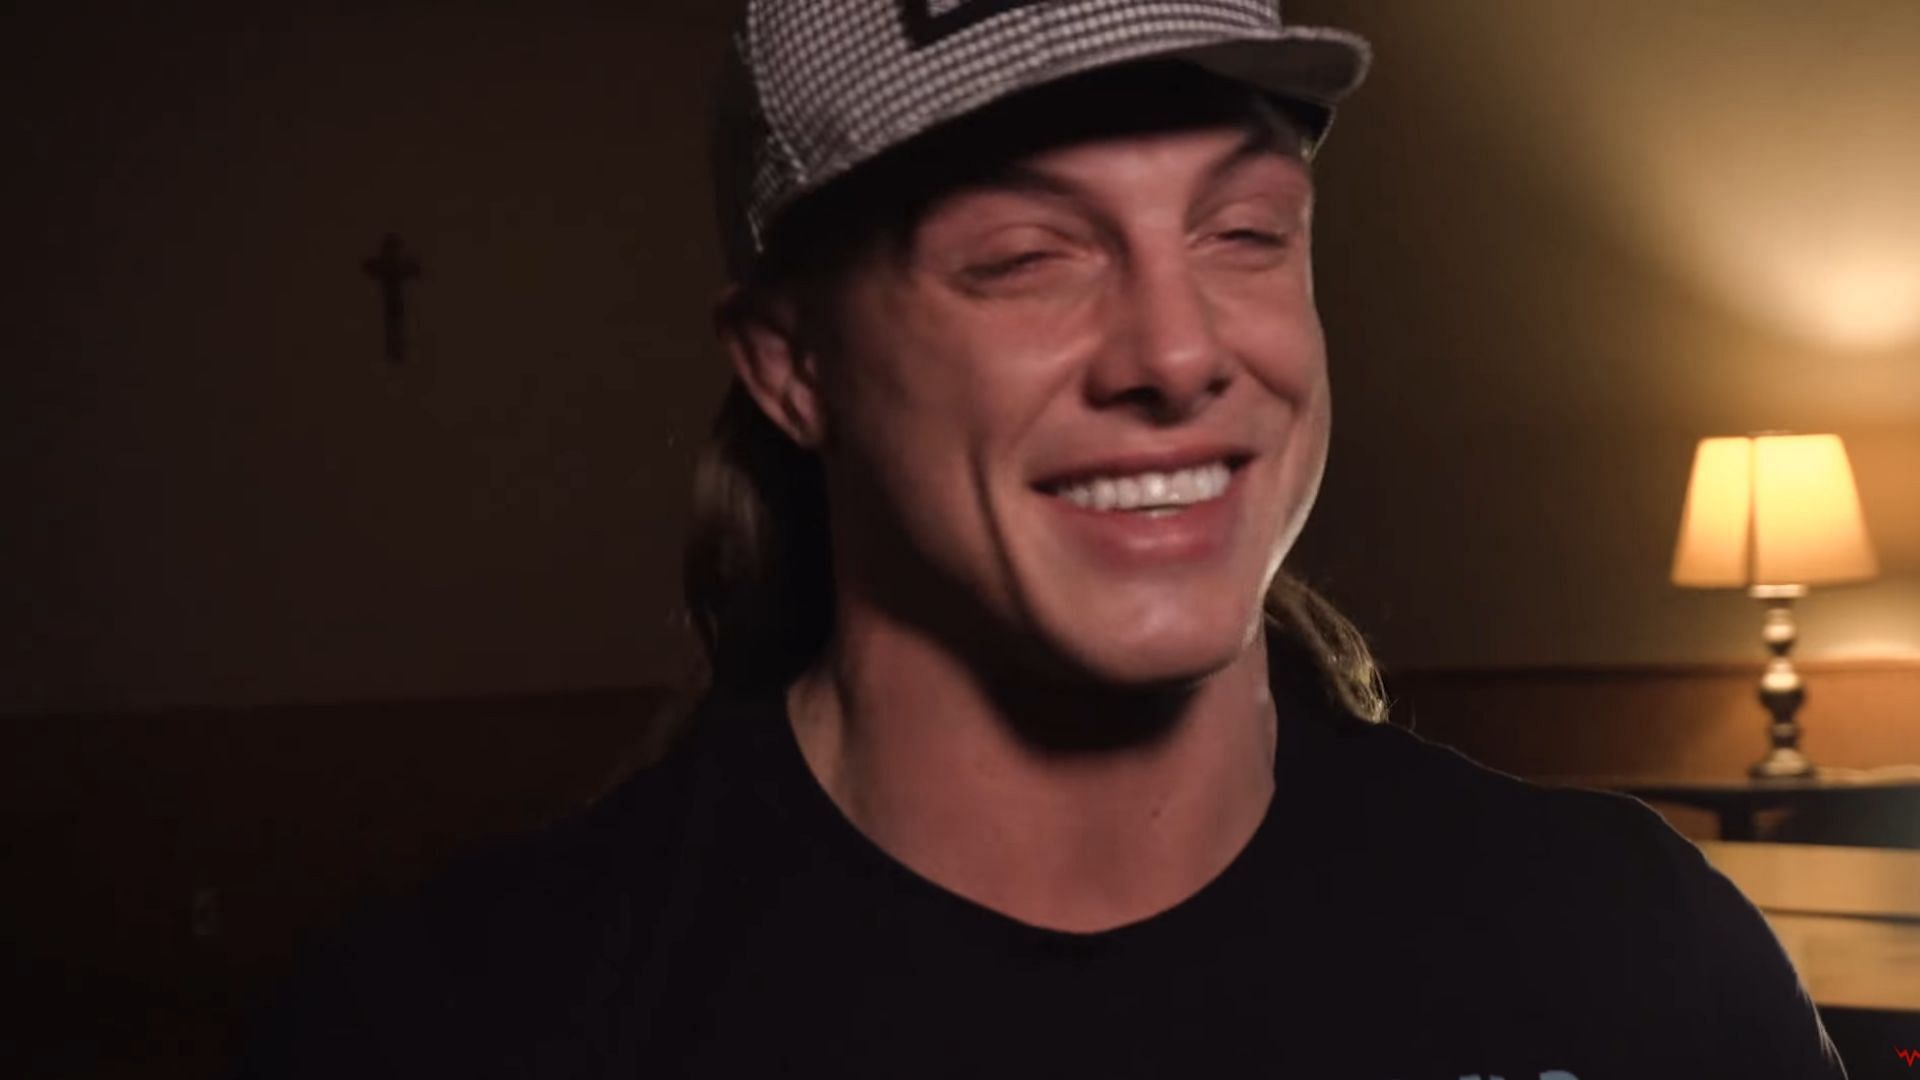 Matt Riddle is in the middle of a murky situation with no indication of what happens next